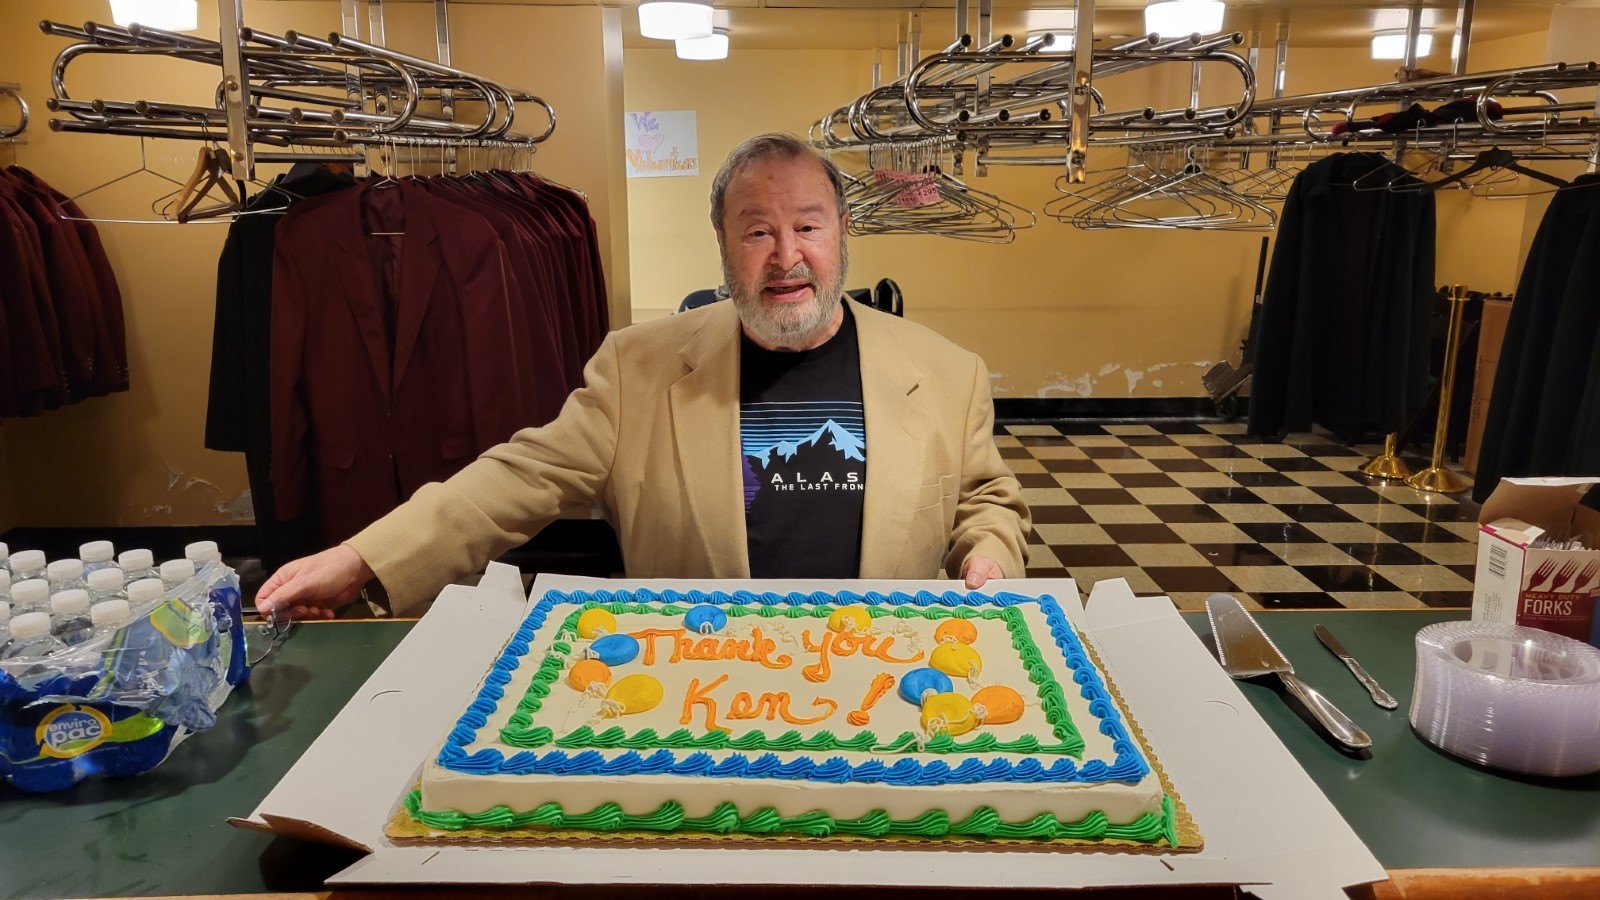 a man in a brown sport coat and black t-shirt stands in from of a large cake that says 'thank you ken'